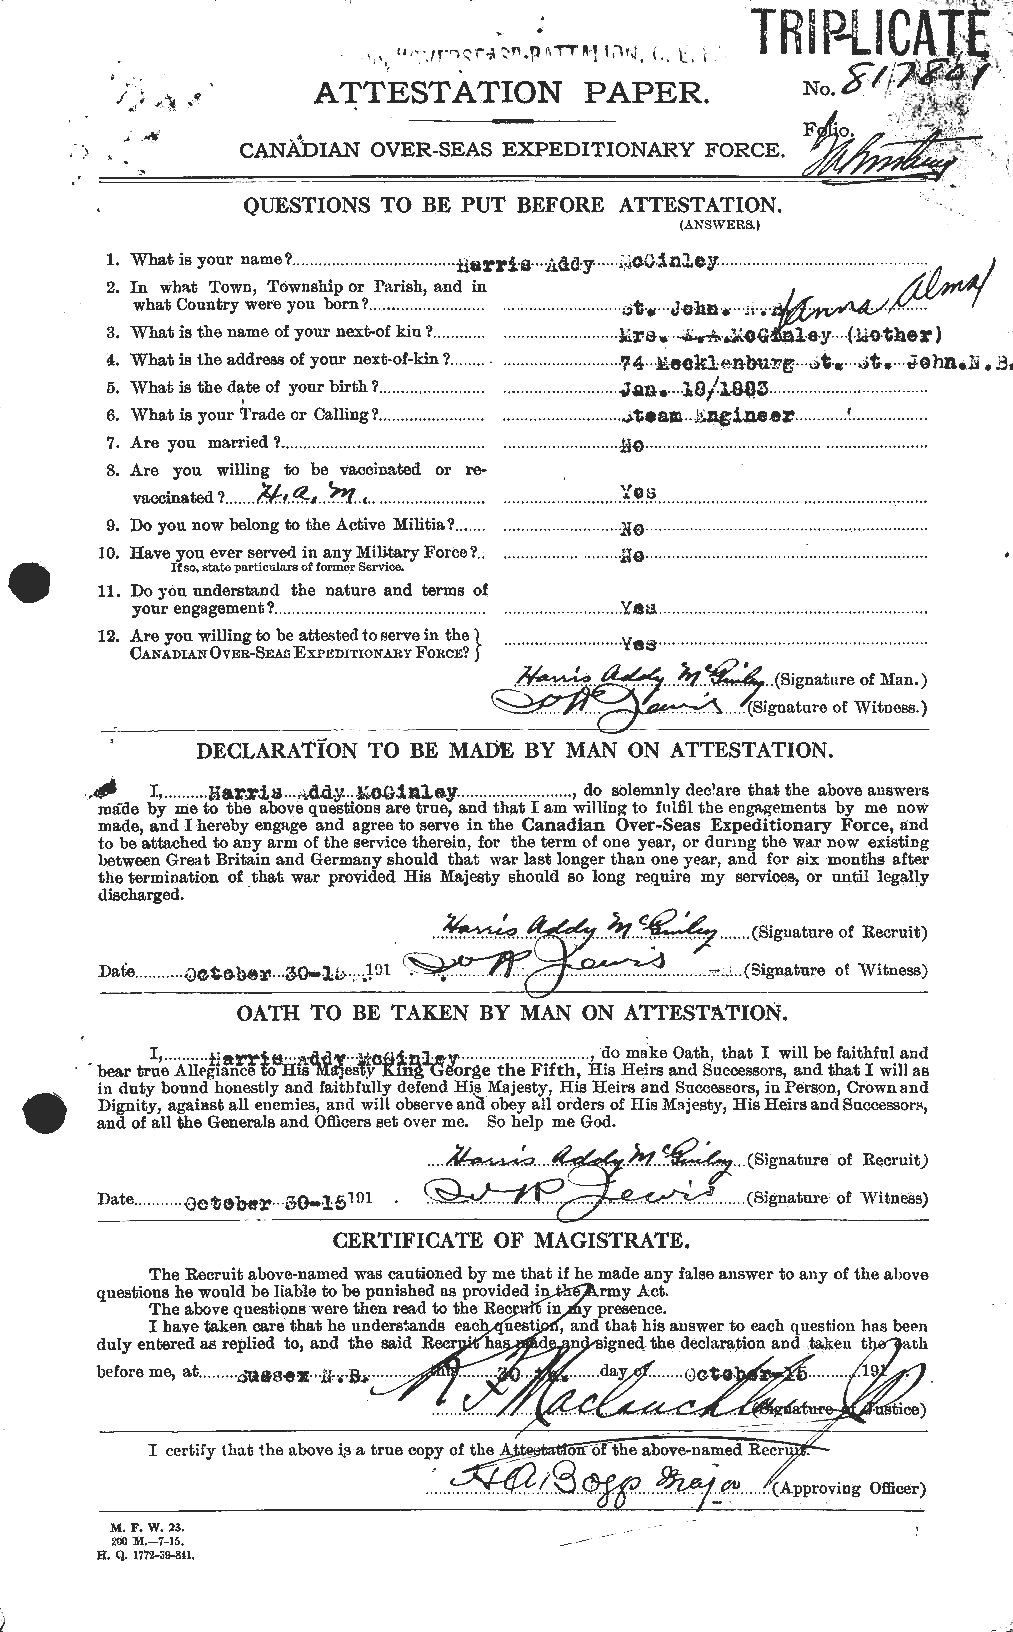 Personnel Records of the First World War - CEF 526315a